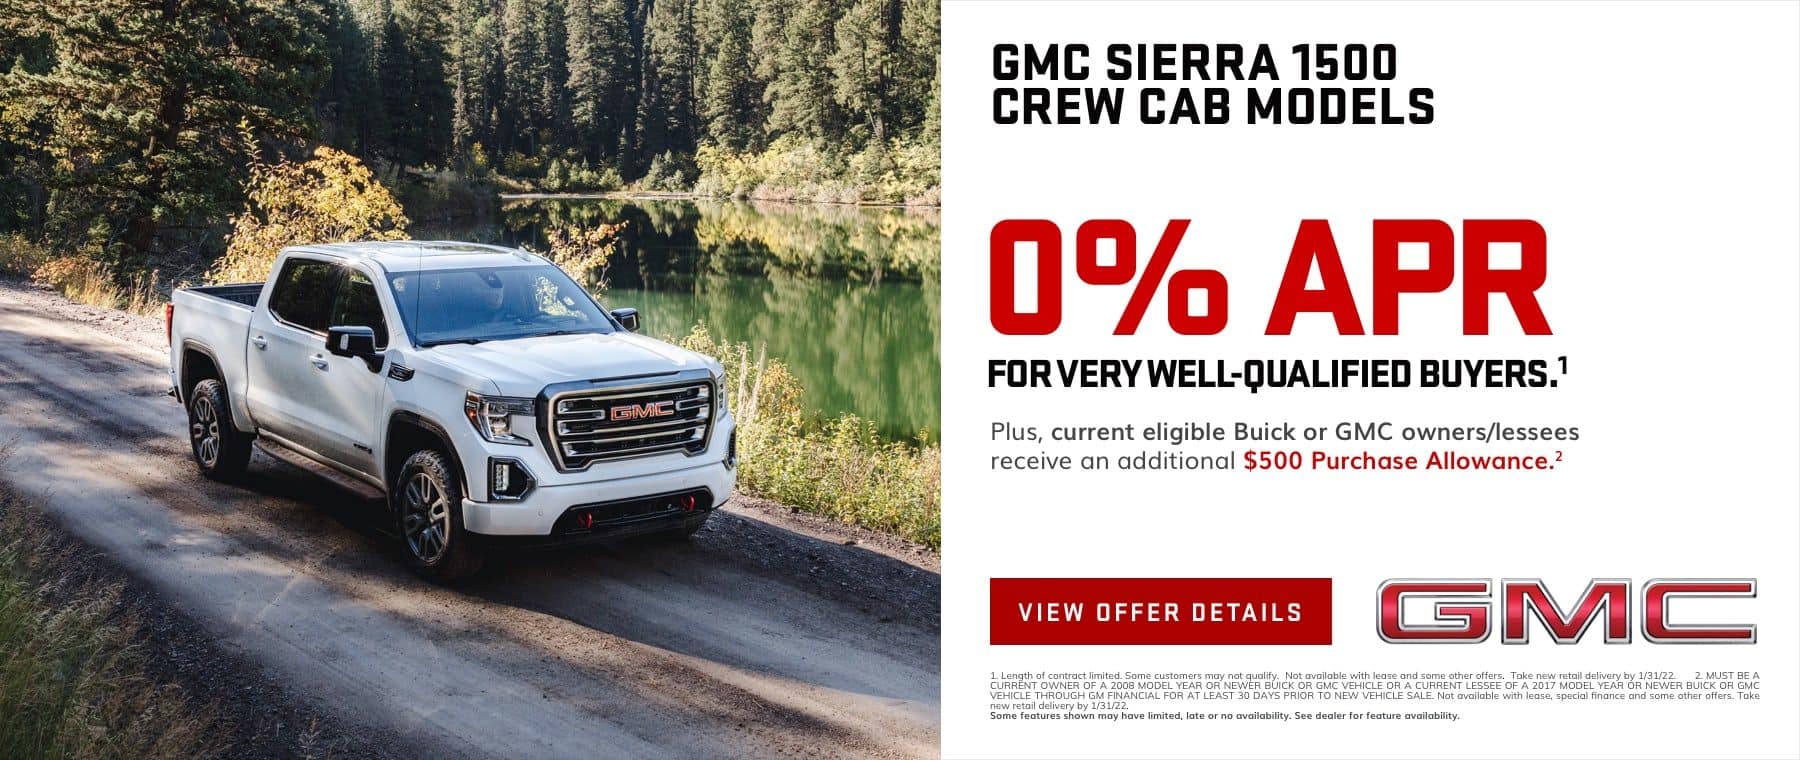 0% APR for very well-qualified buyers.1 Plus, current eligible Buick or GMC owners/lessees receive an additional $500 Purchase Allowance on most models.2